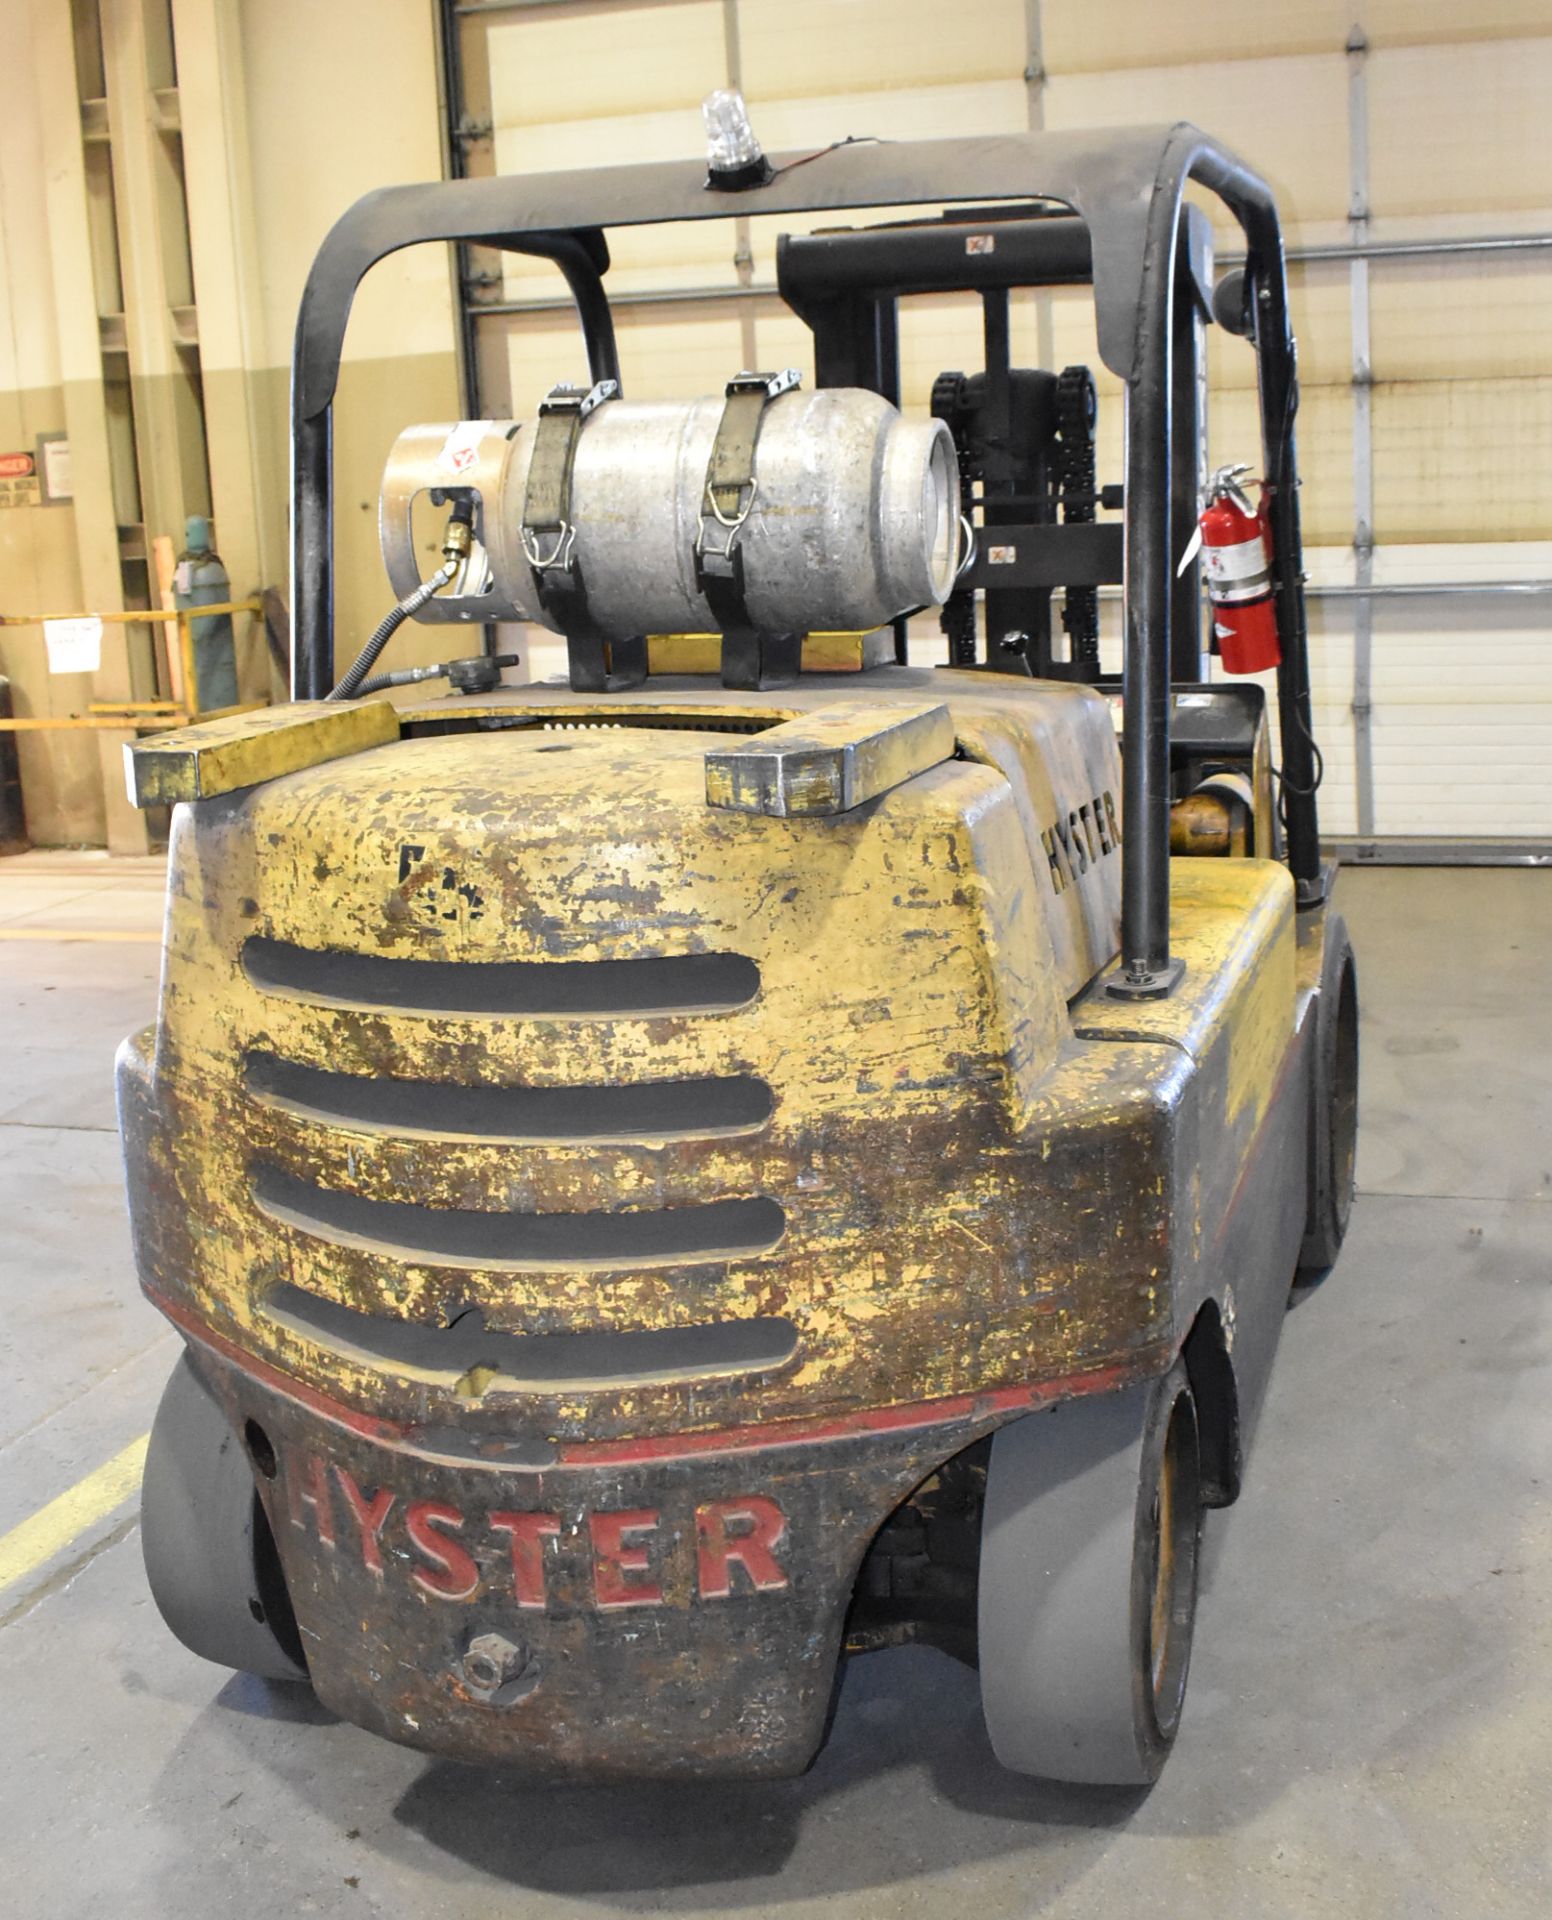 HYSTER S150A 15,000 LB. CAPACITY LPG FORKLIFT WITH 129" MAX. LIFT HEIGHT, 2-STAGE MAST, SOLID TIRES, - Image 8 of 18